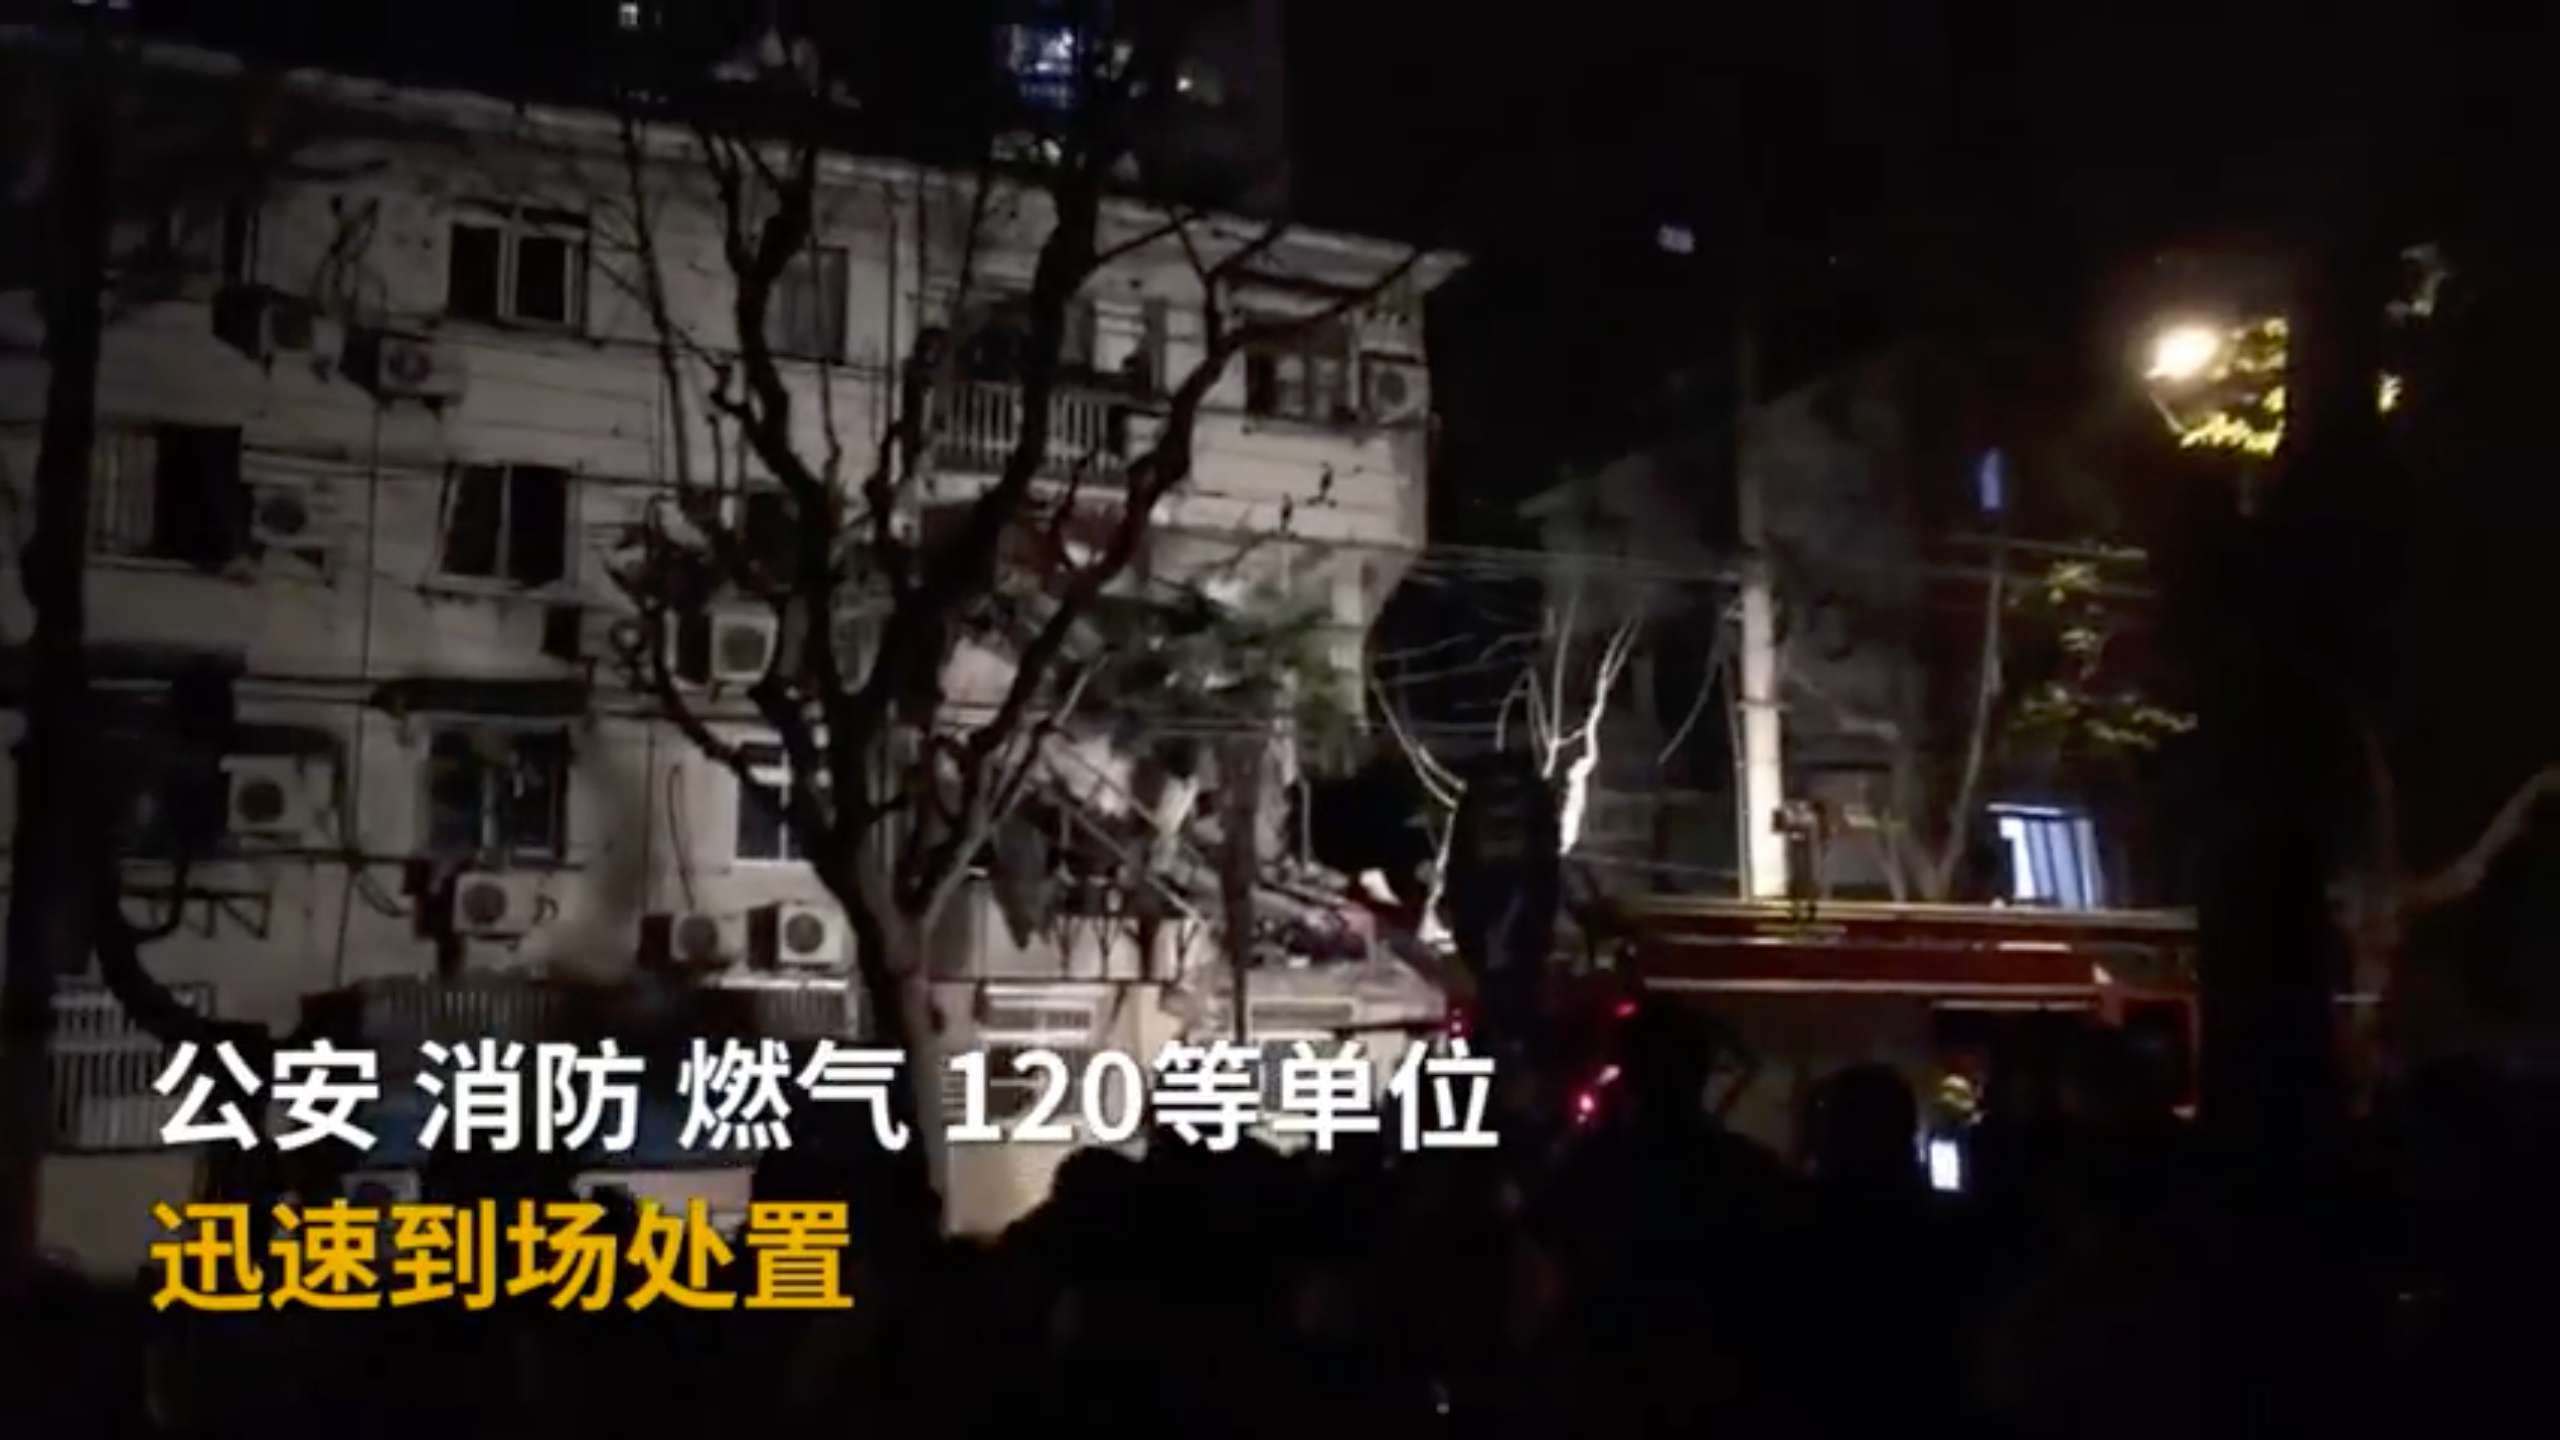 The block of flats in Shanghai, which have been cordoned off following Wednesday night’s blast. Photo: Handout